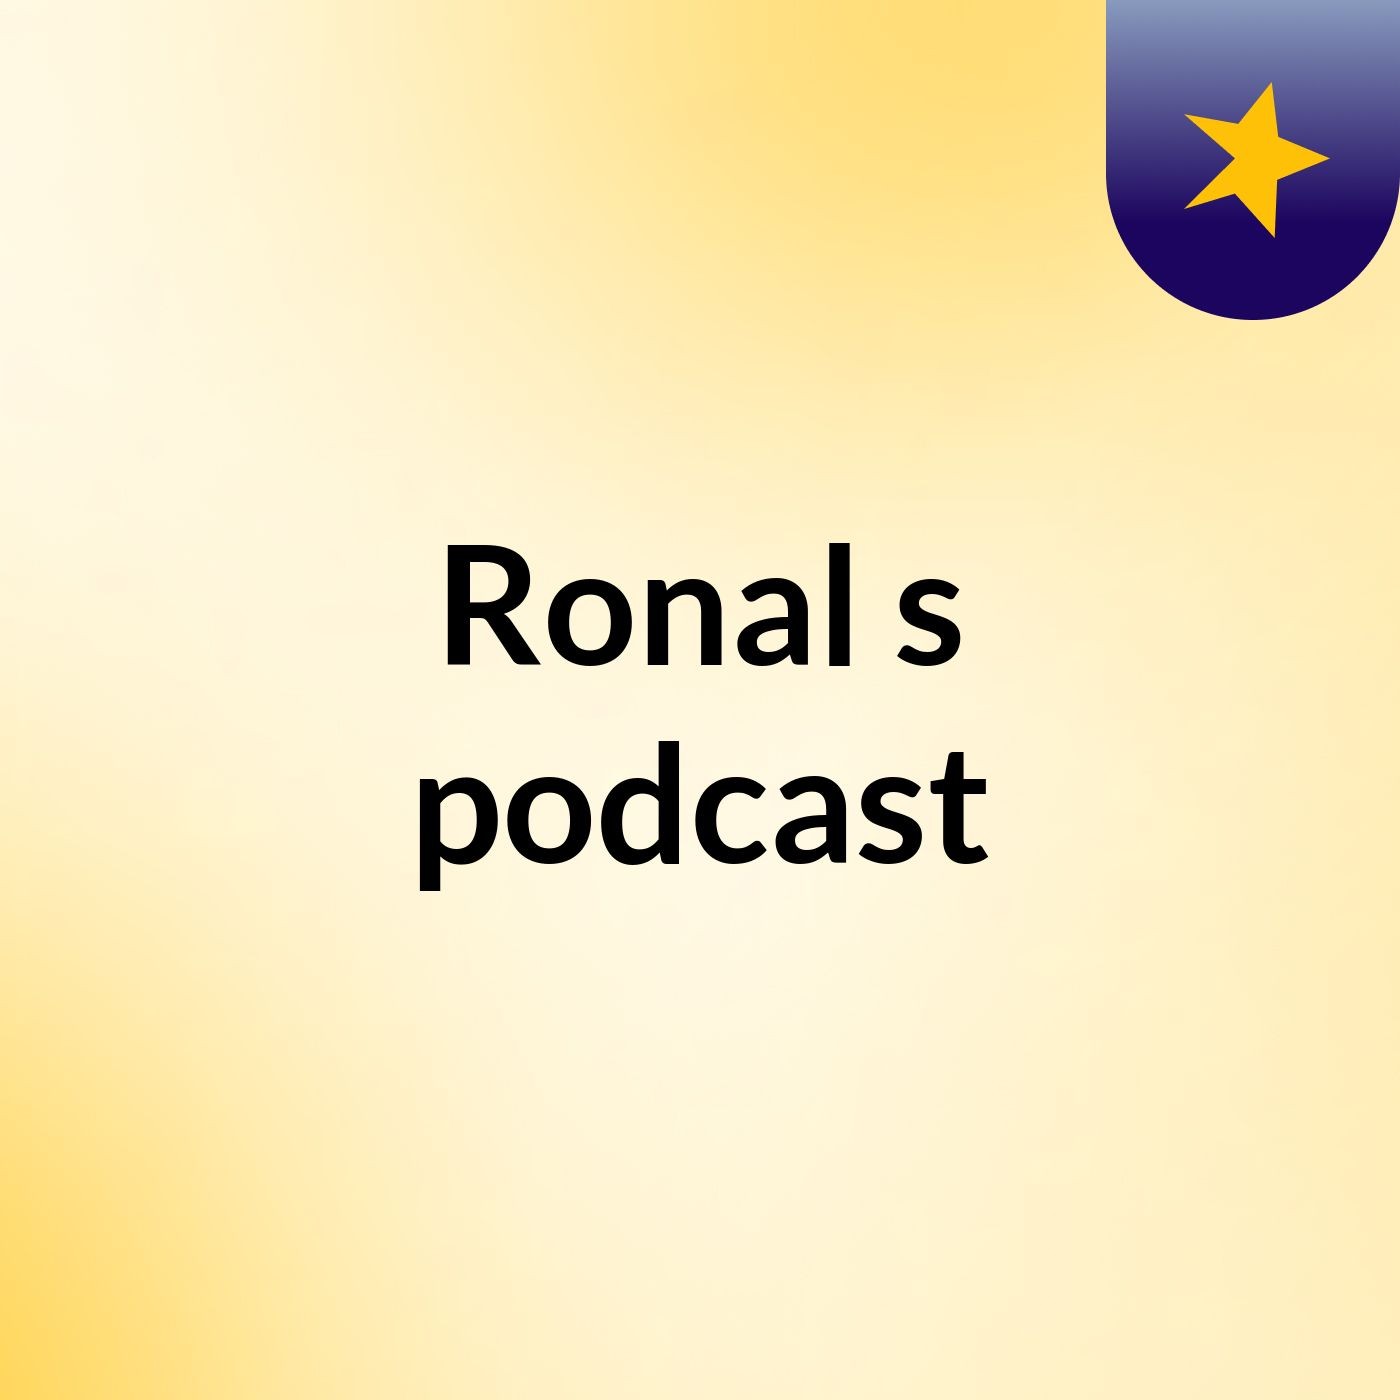 Ronal's podcast